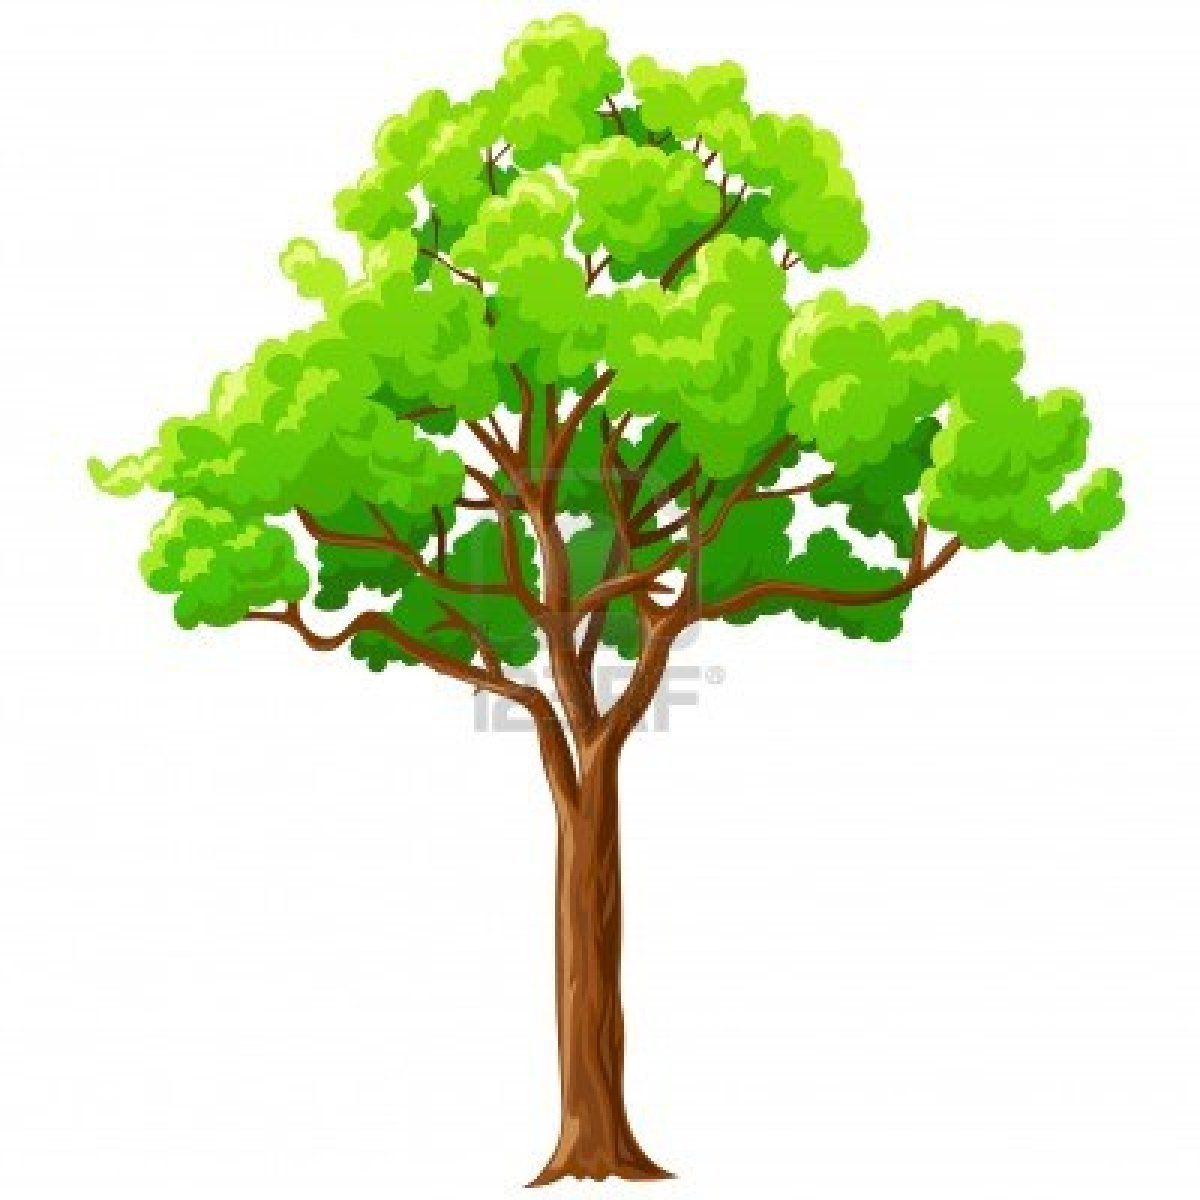 Tree Background Wallpaper   Clipart Panda   Free Clipart Images